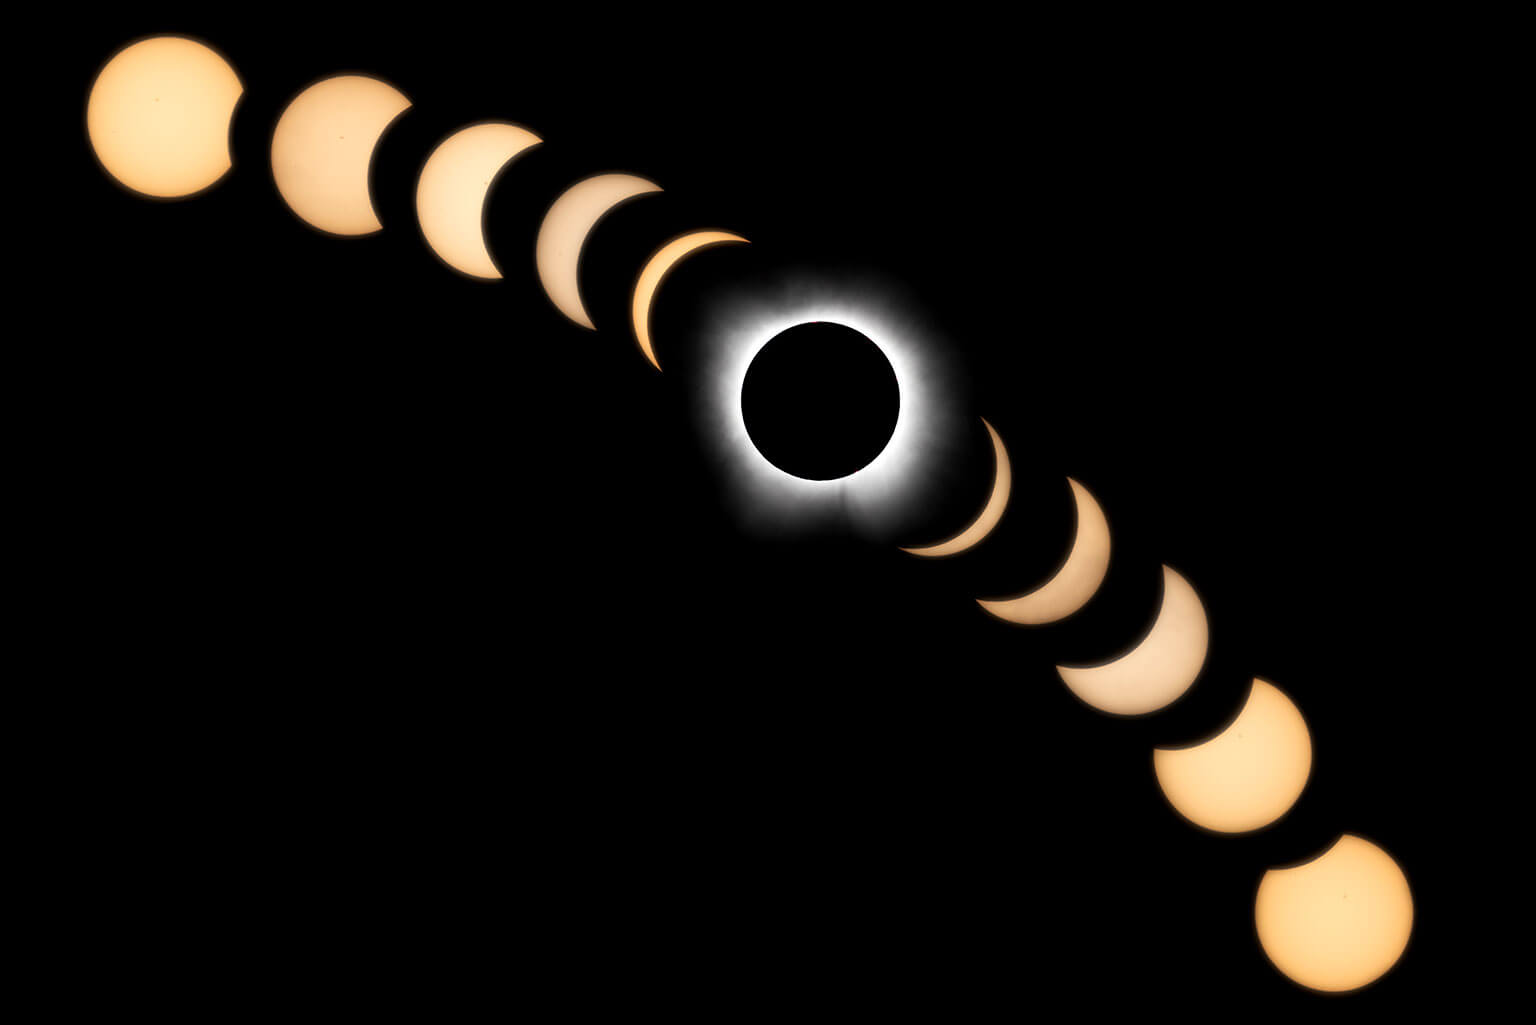 Cadet 1st Class Brandon Lindner time-lapse photography captures the phases of the total solar eclipse in Texas.